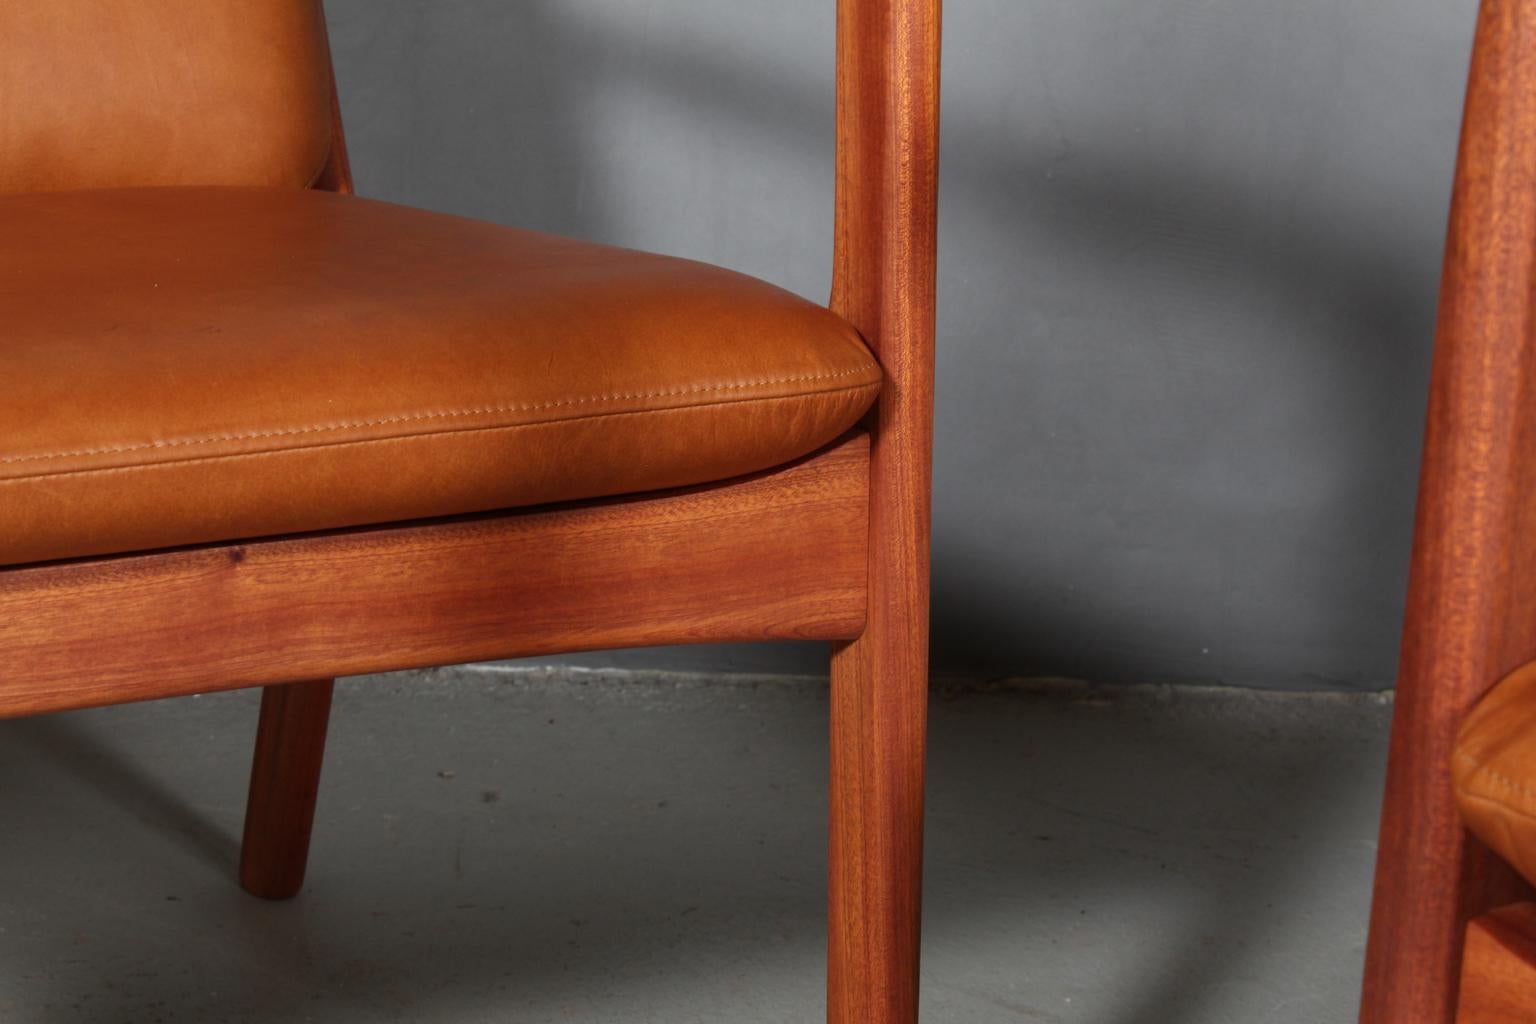 Ole Wanscher Lounge Chairs, Model PJ112, Cognac Aniline Leather In Excellent Condition For Sale In Esbjerg, DK